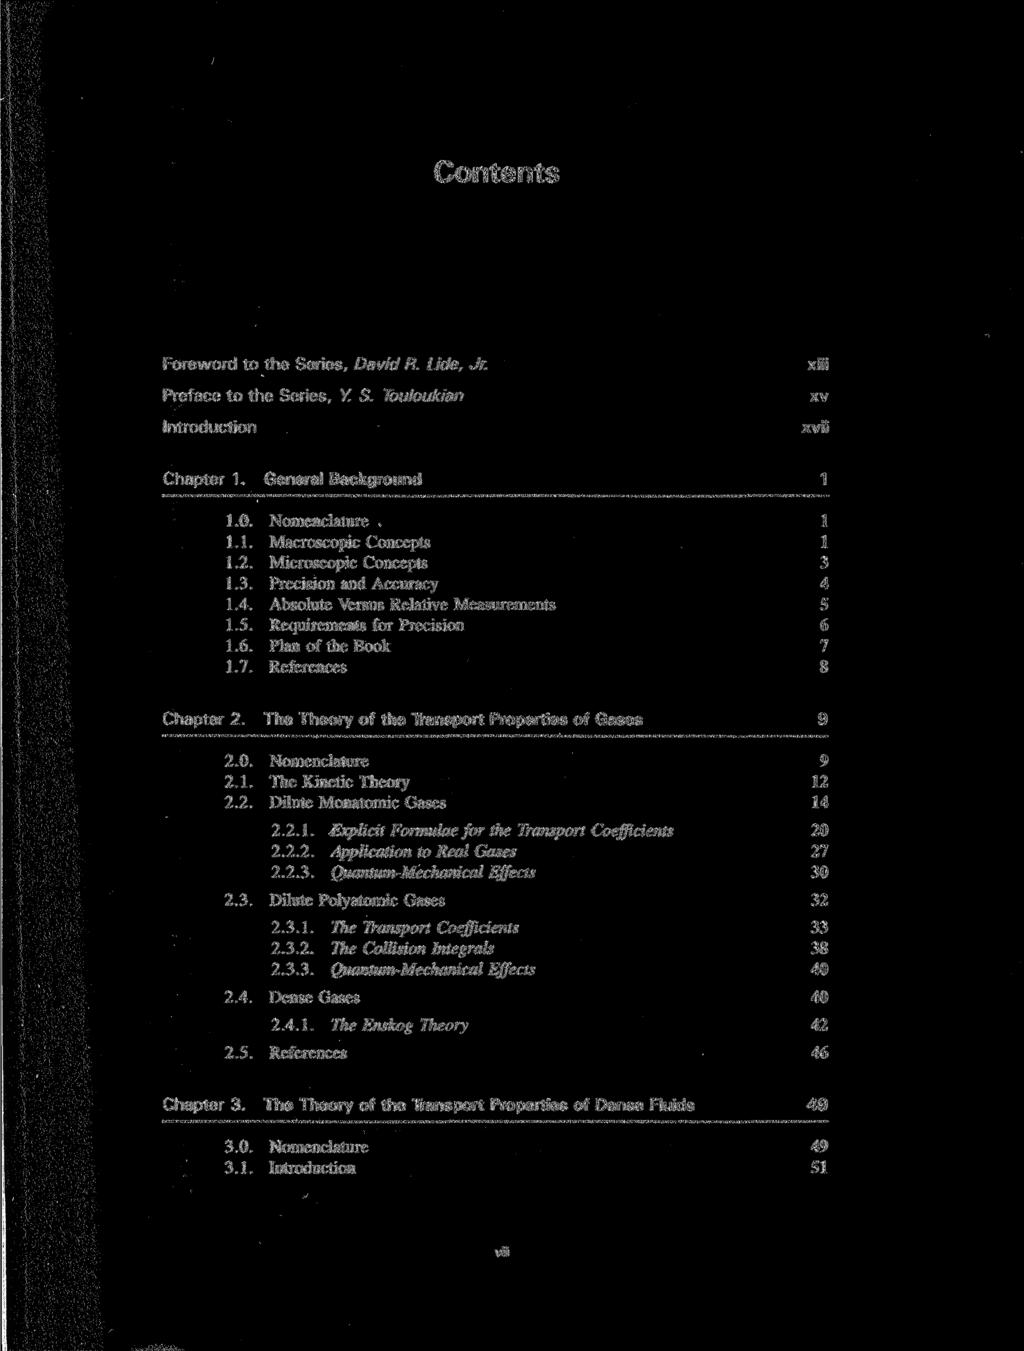 Contents Foreword to the Series, David R. Lide, Jr. Preface to the Series, Y. S. Touloukian Introduction xiii xv xvii Chapter 1. General Background 1 1.0. Nomenclature 1 1.1. Macroscopic Concepts 1 1.